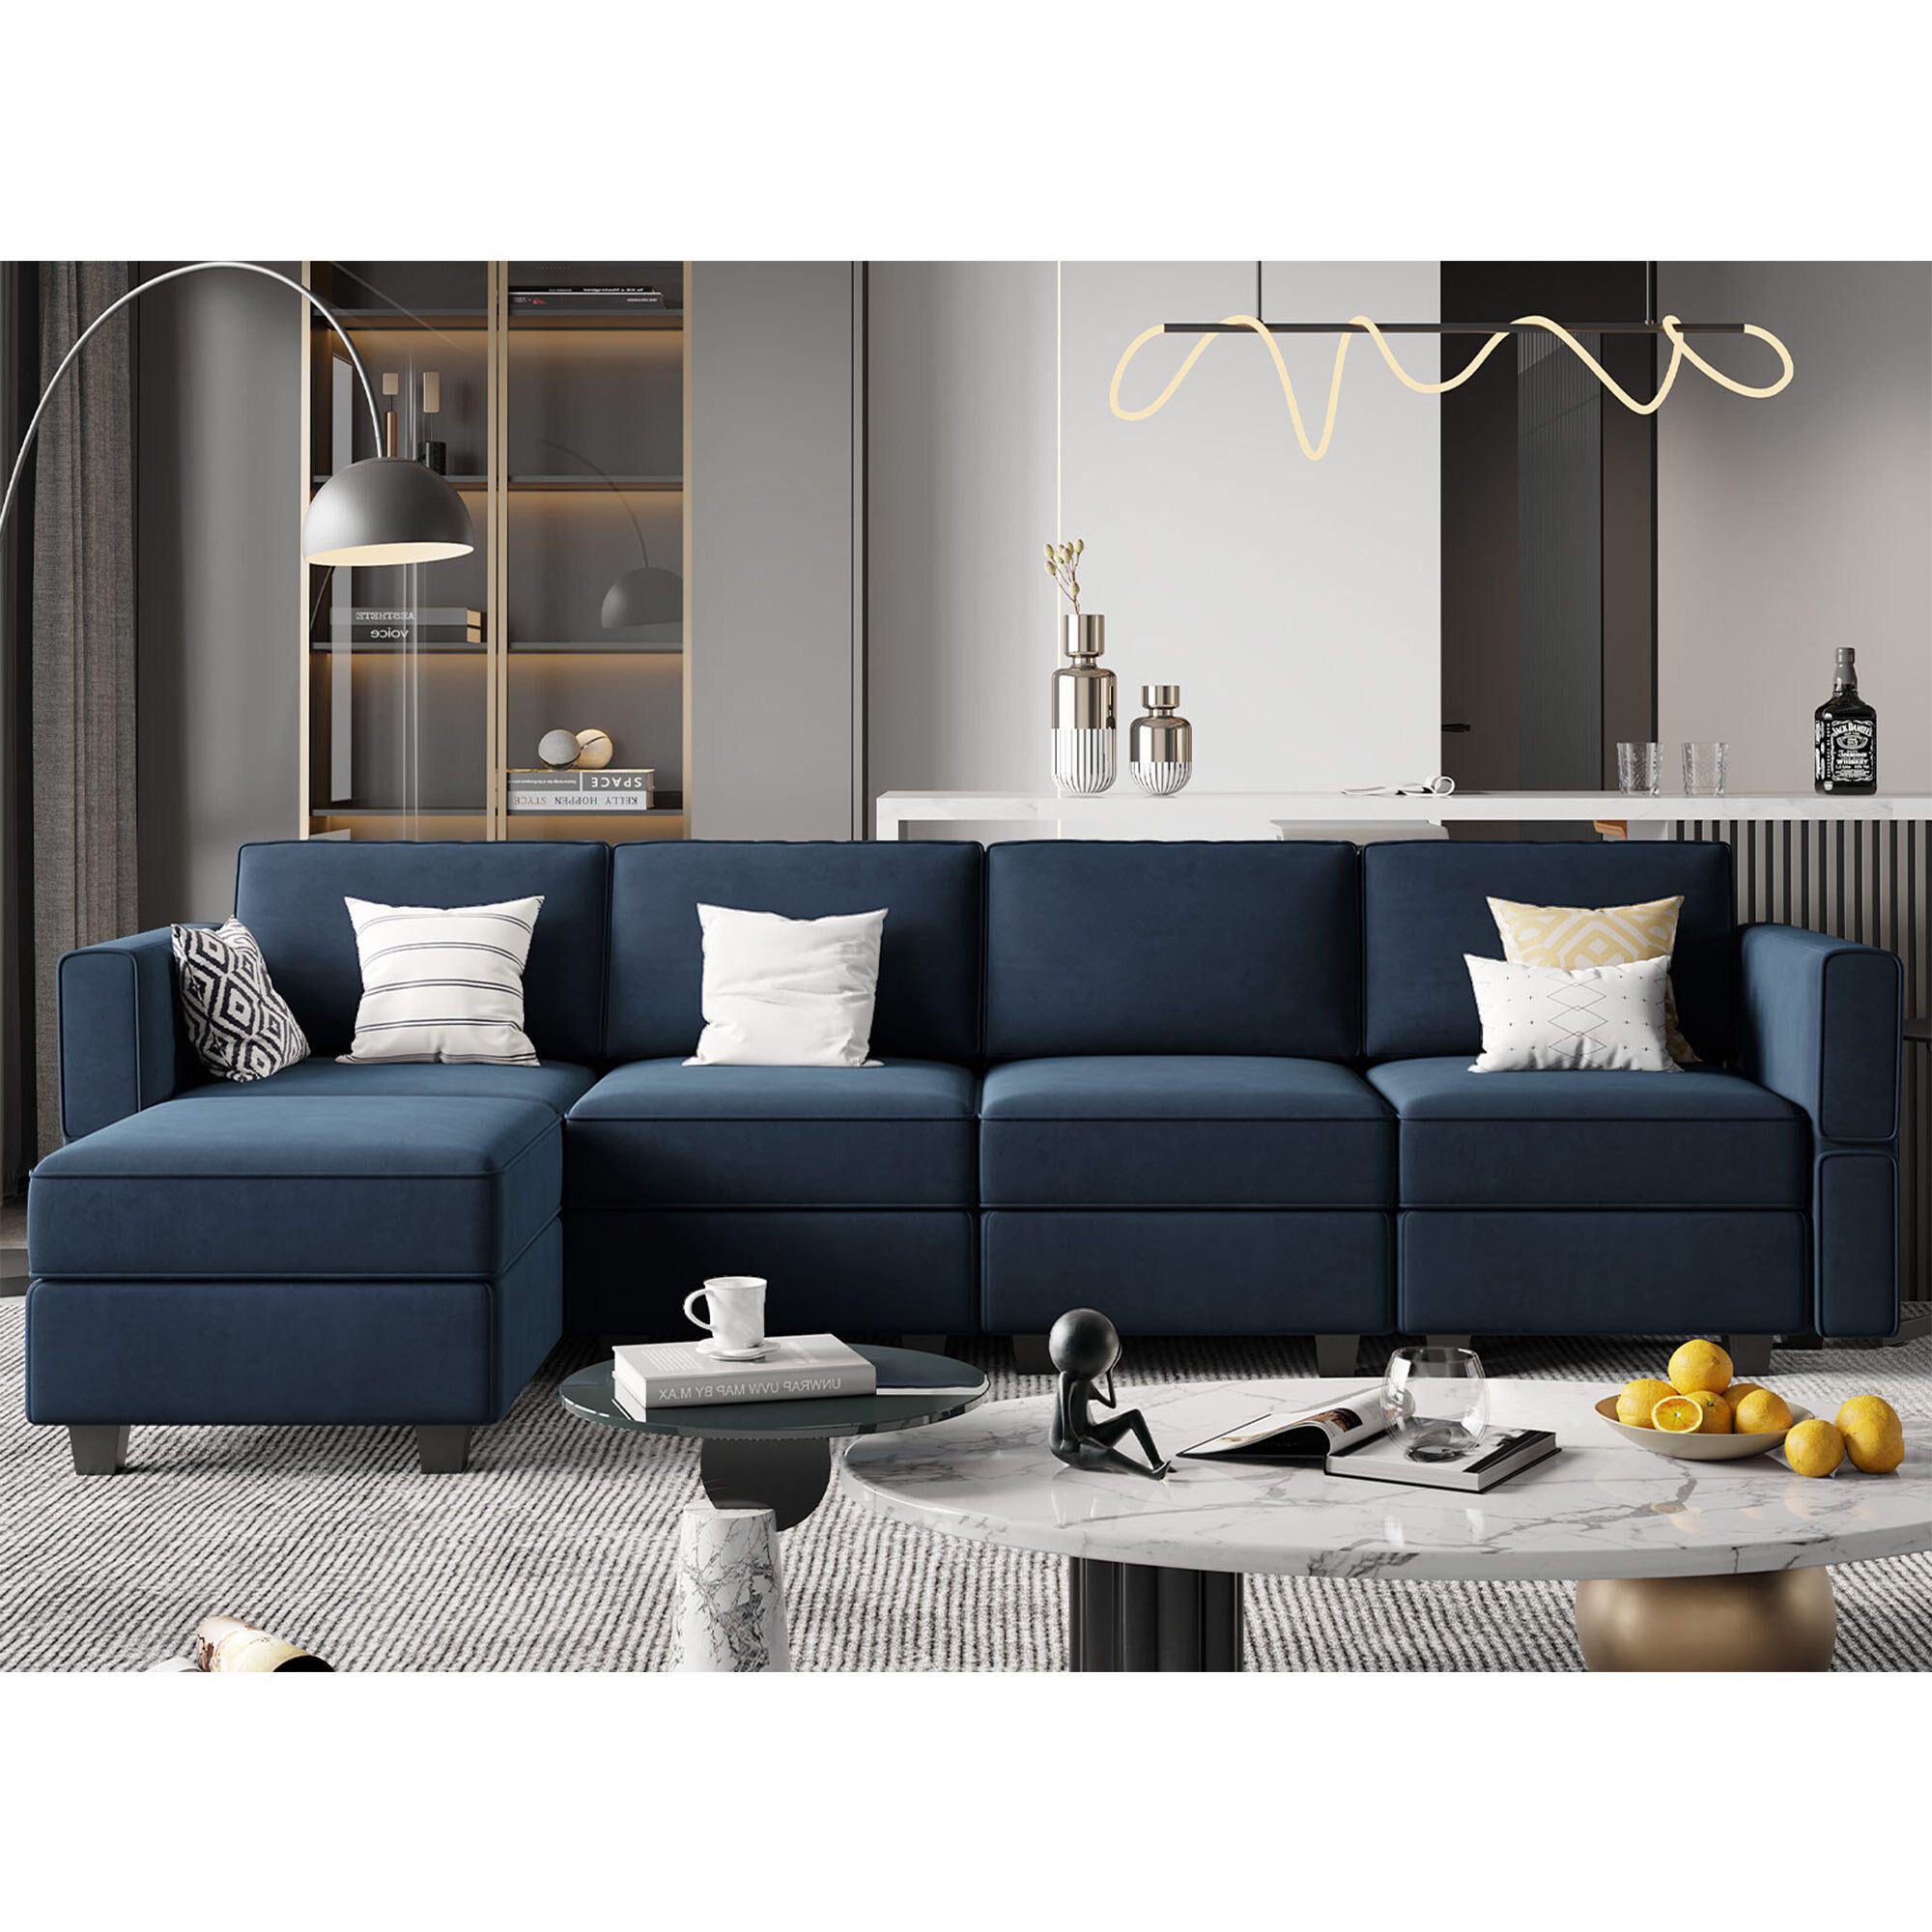 Featured Photo of The 20 Best Collection of Upholstered Modular Couches with Storage